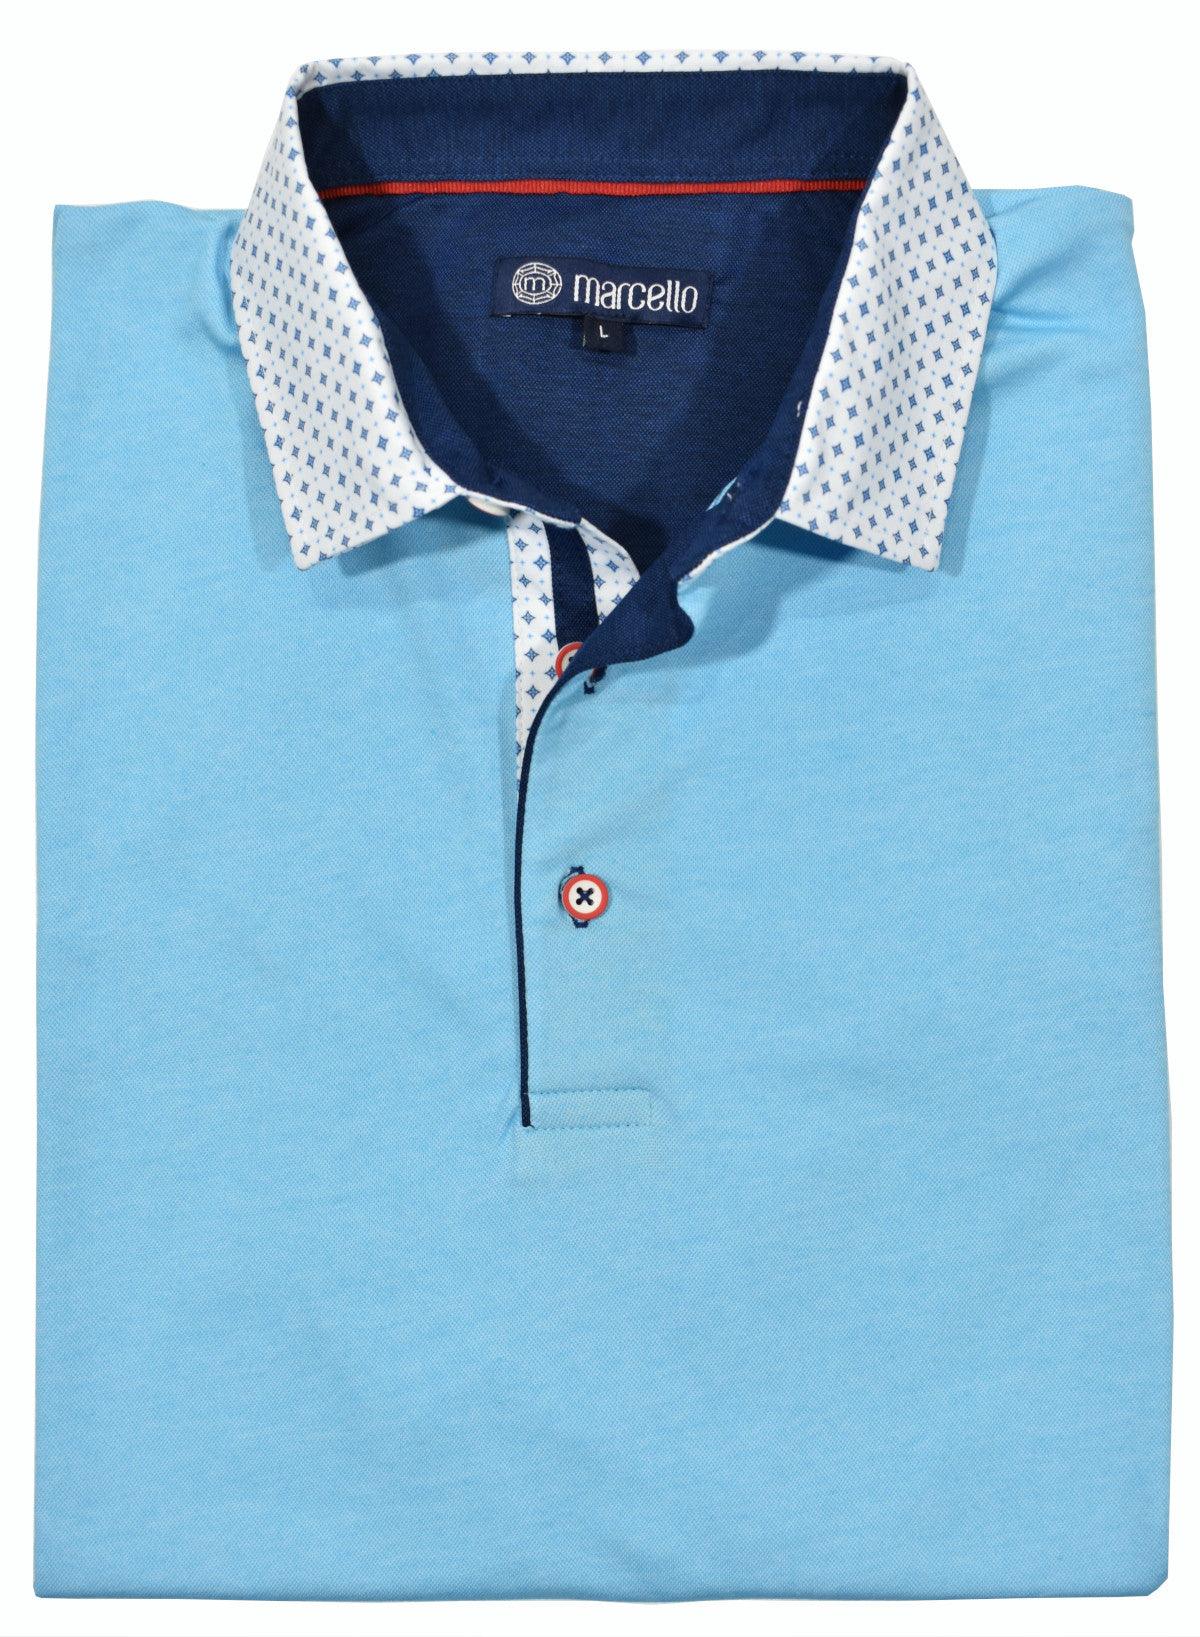 Marcello Signature Collar Sport Polo - Teal  Luxurious soft hand feeling fabric, single mercerized for an enhanced look and feel. Collar detailing with contrast fabric taping. Cotton with a little lycra for stretch and comfort. Open bottom with side slits and enhanced details. Modern fit, perfect for a medium build.